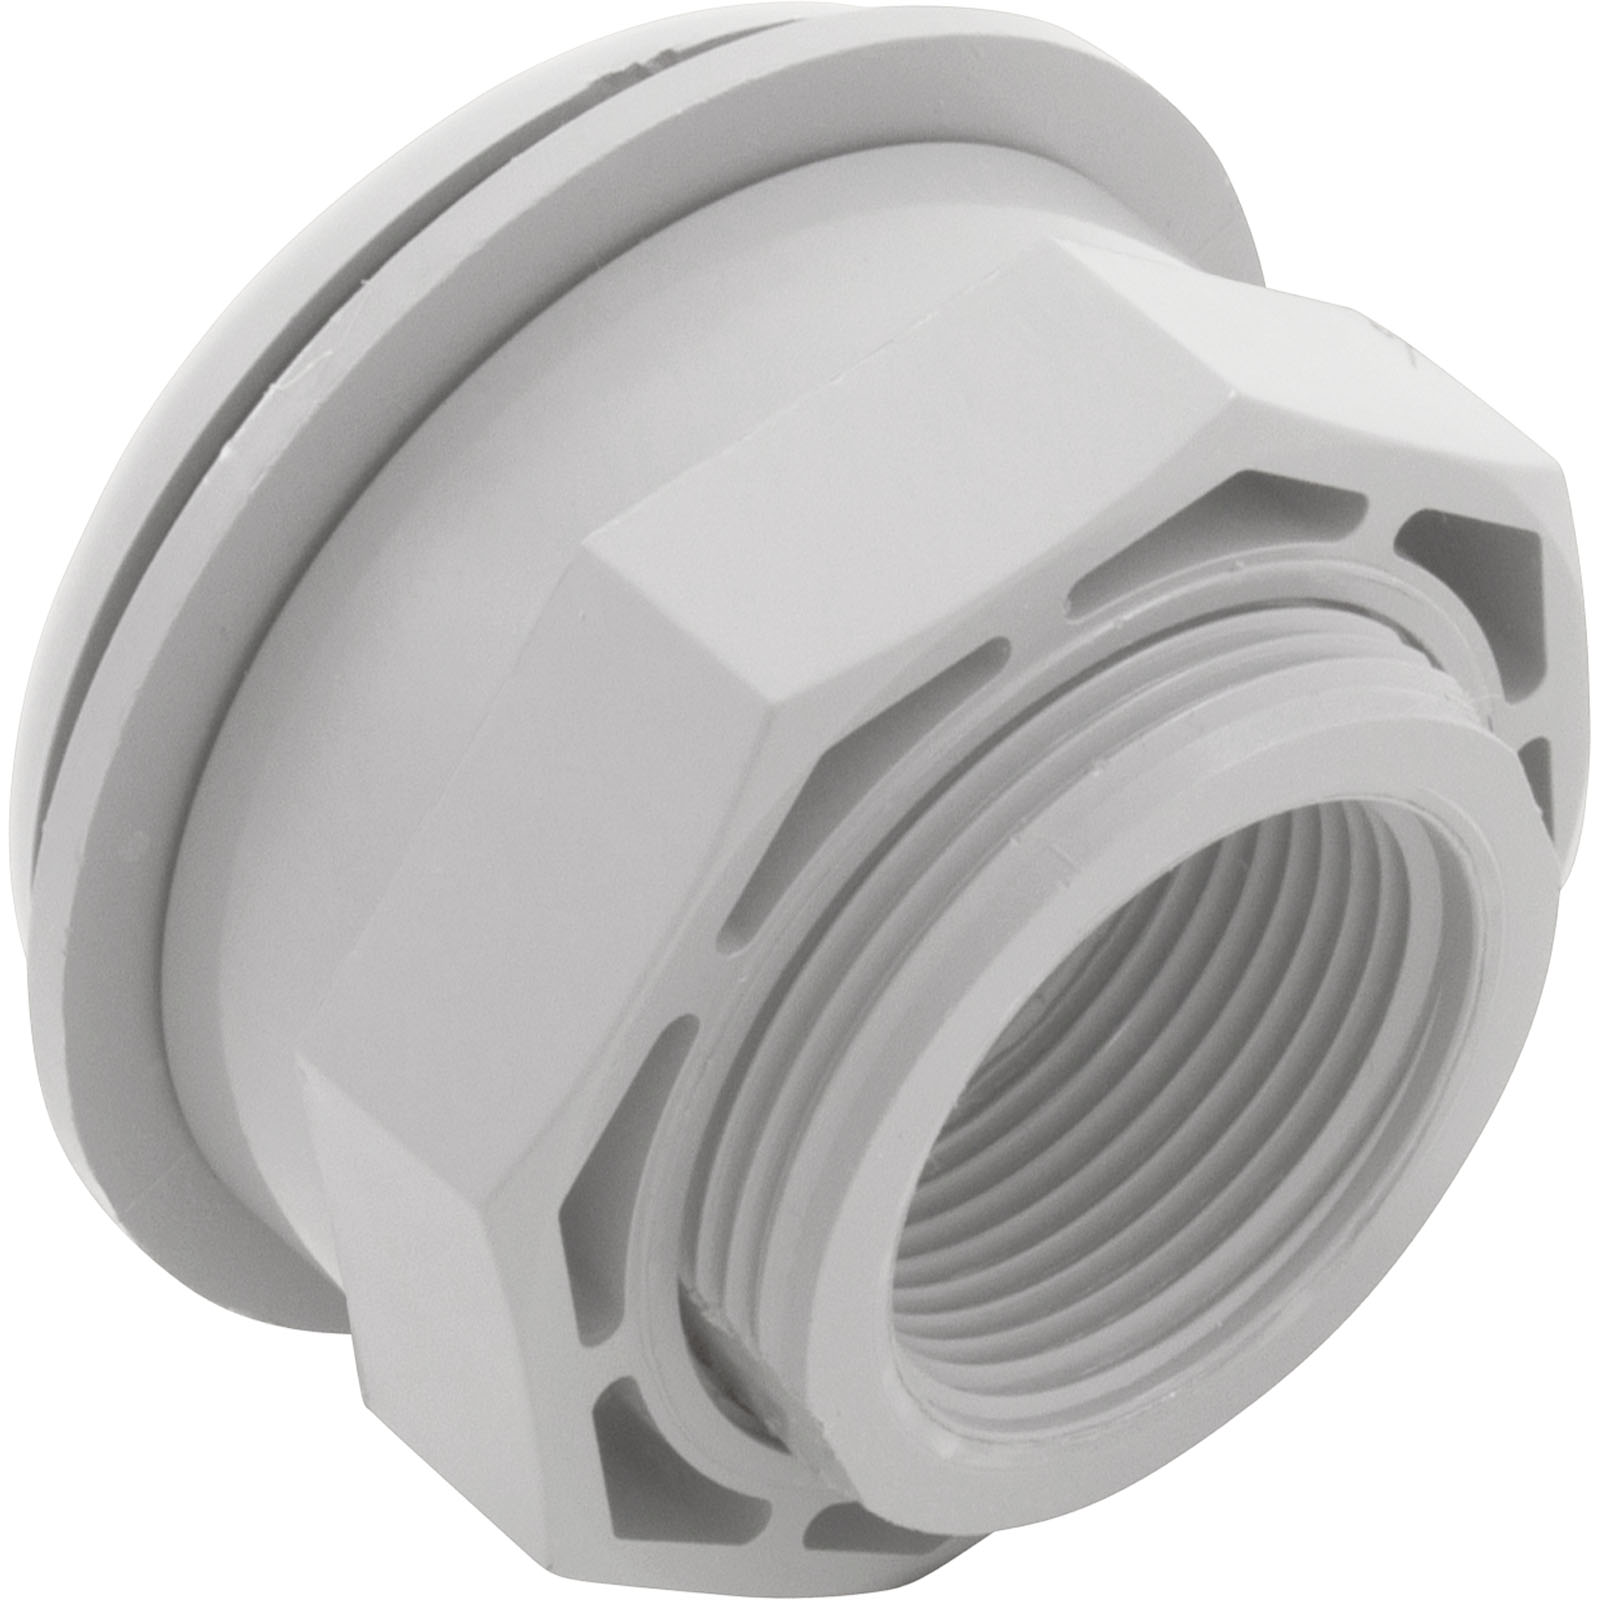 Picture of 25522-000-000 Wall Fitting CMP 3"hs 1-1/2"mpt 3-1/2"fd w/Nut White